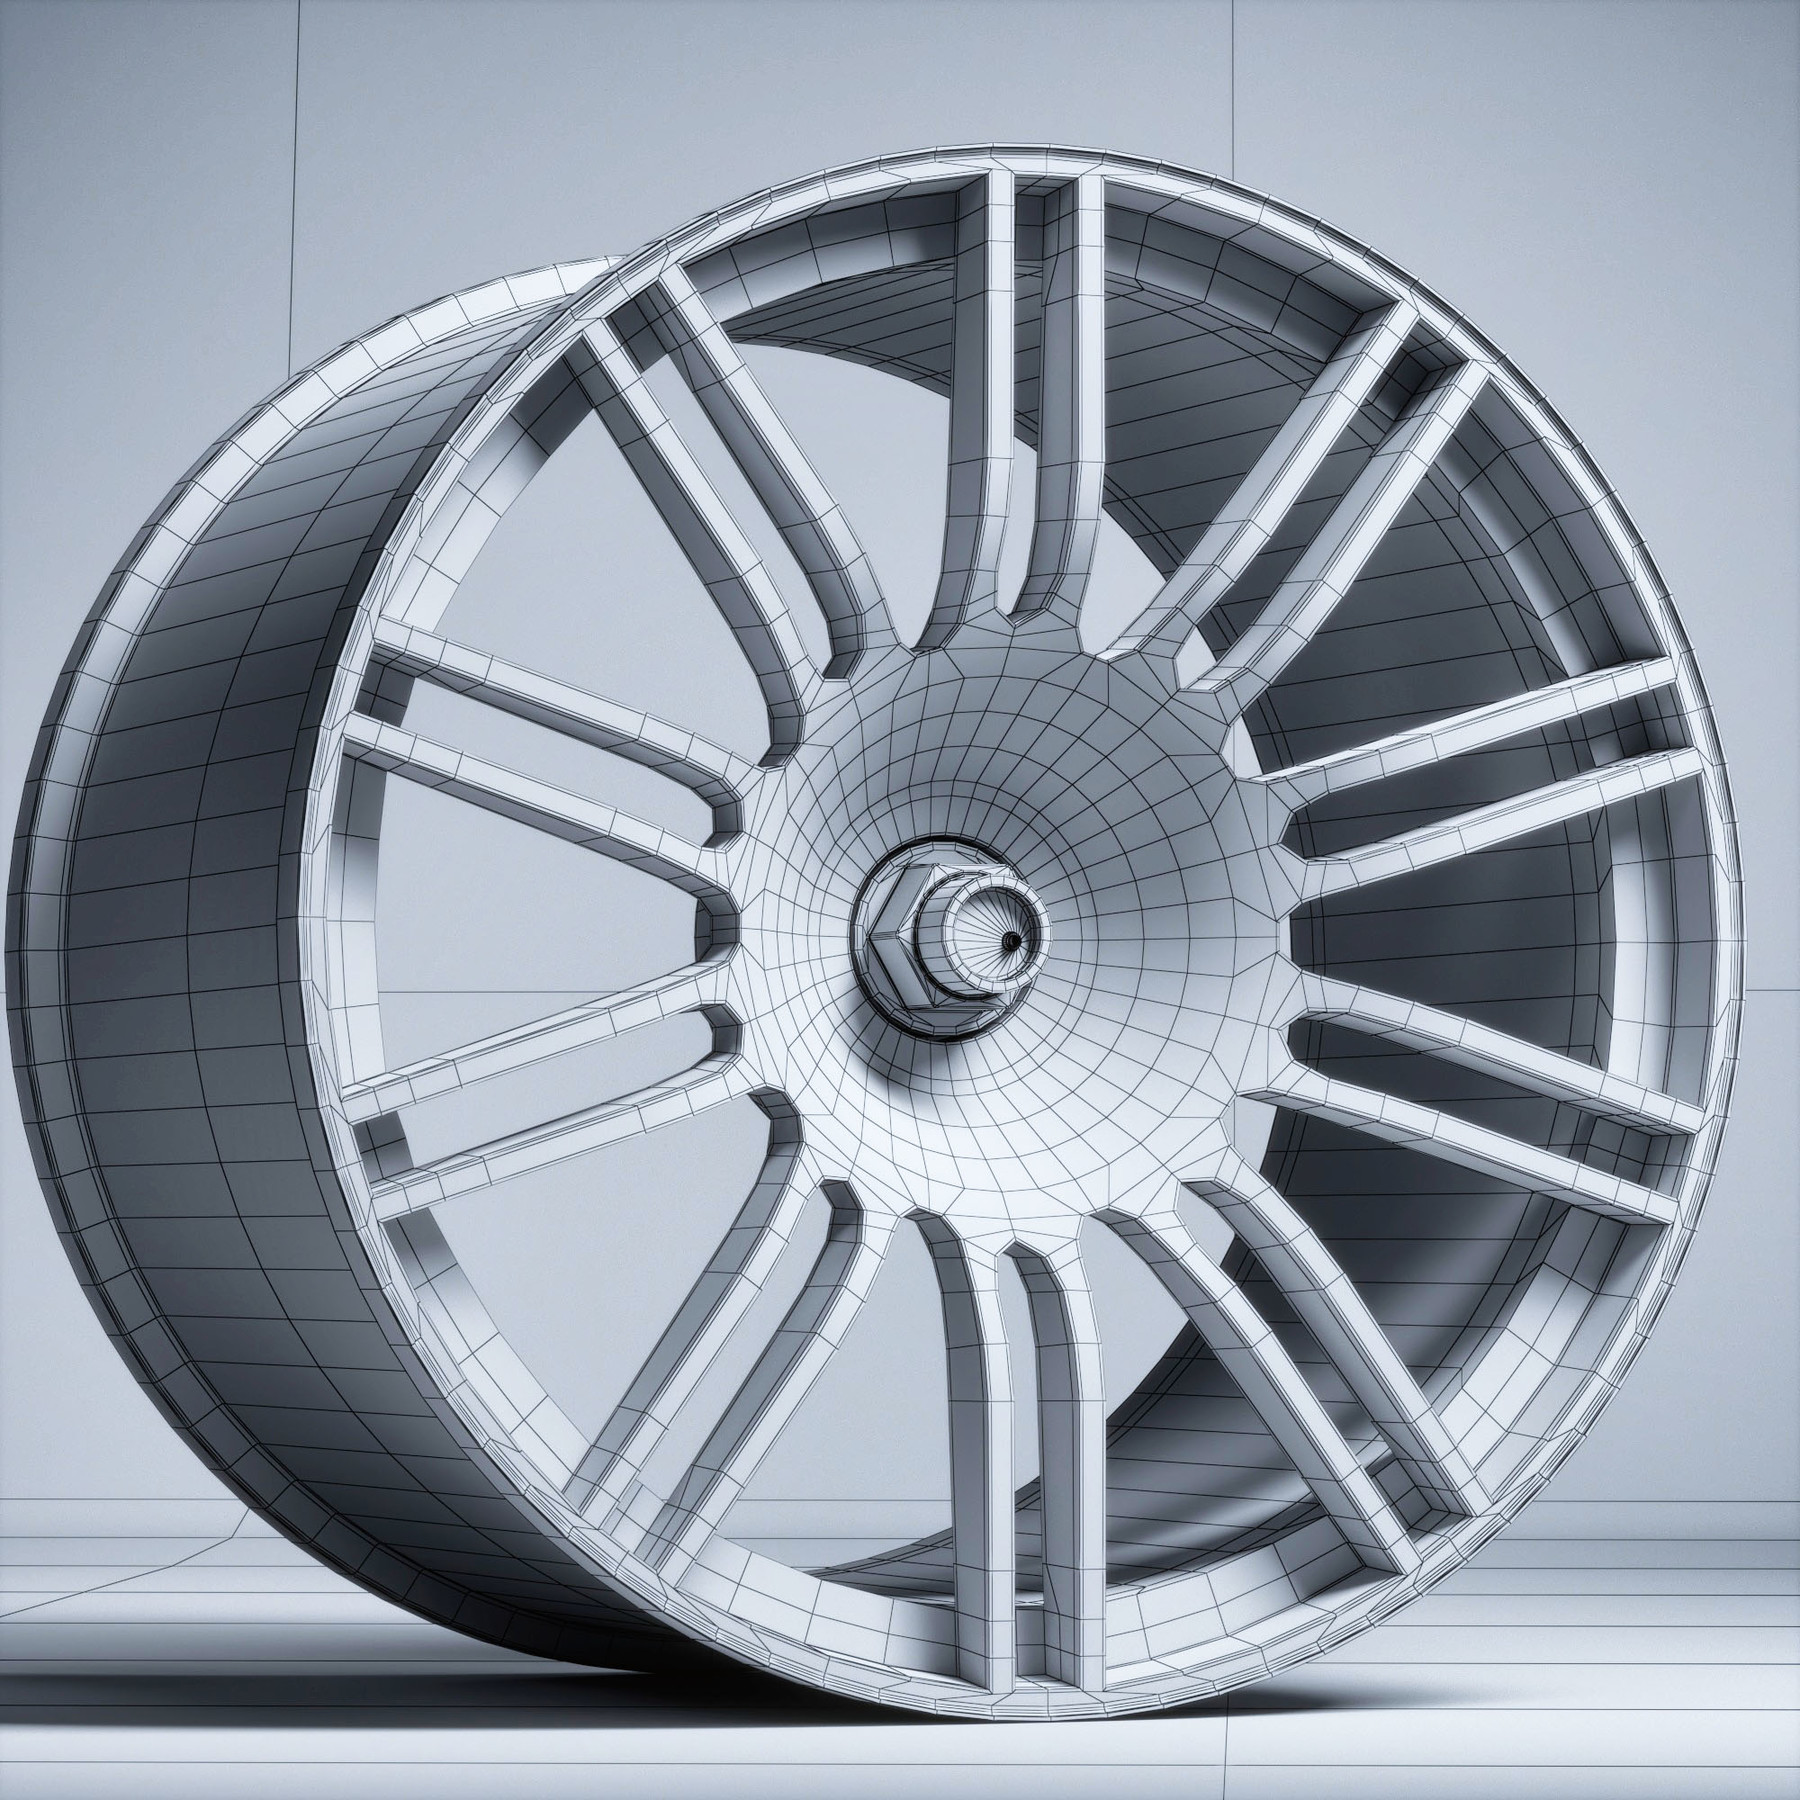 BBS Wheel Simulation App Available Now! – MK MOTORSPORTS